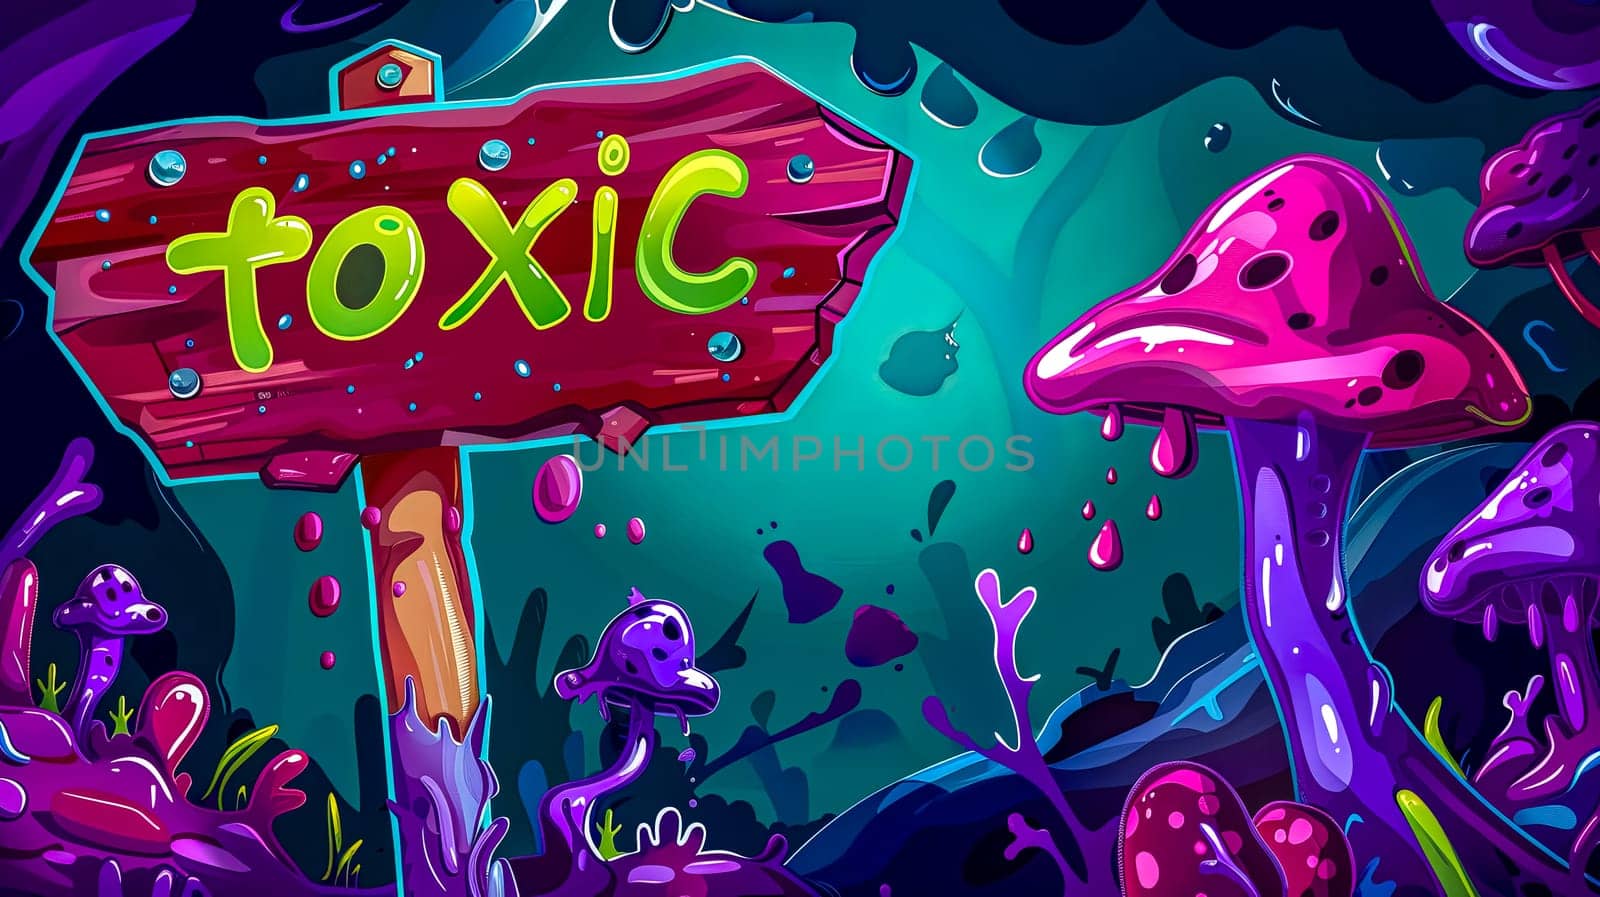 Vibrant illustration of a toxic swamp with whimsical mushrooms and a wooden sign